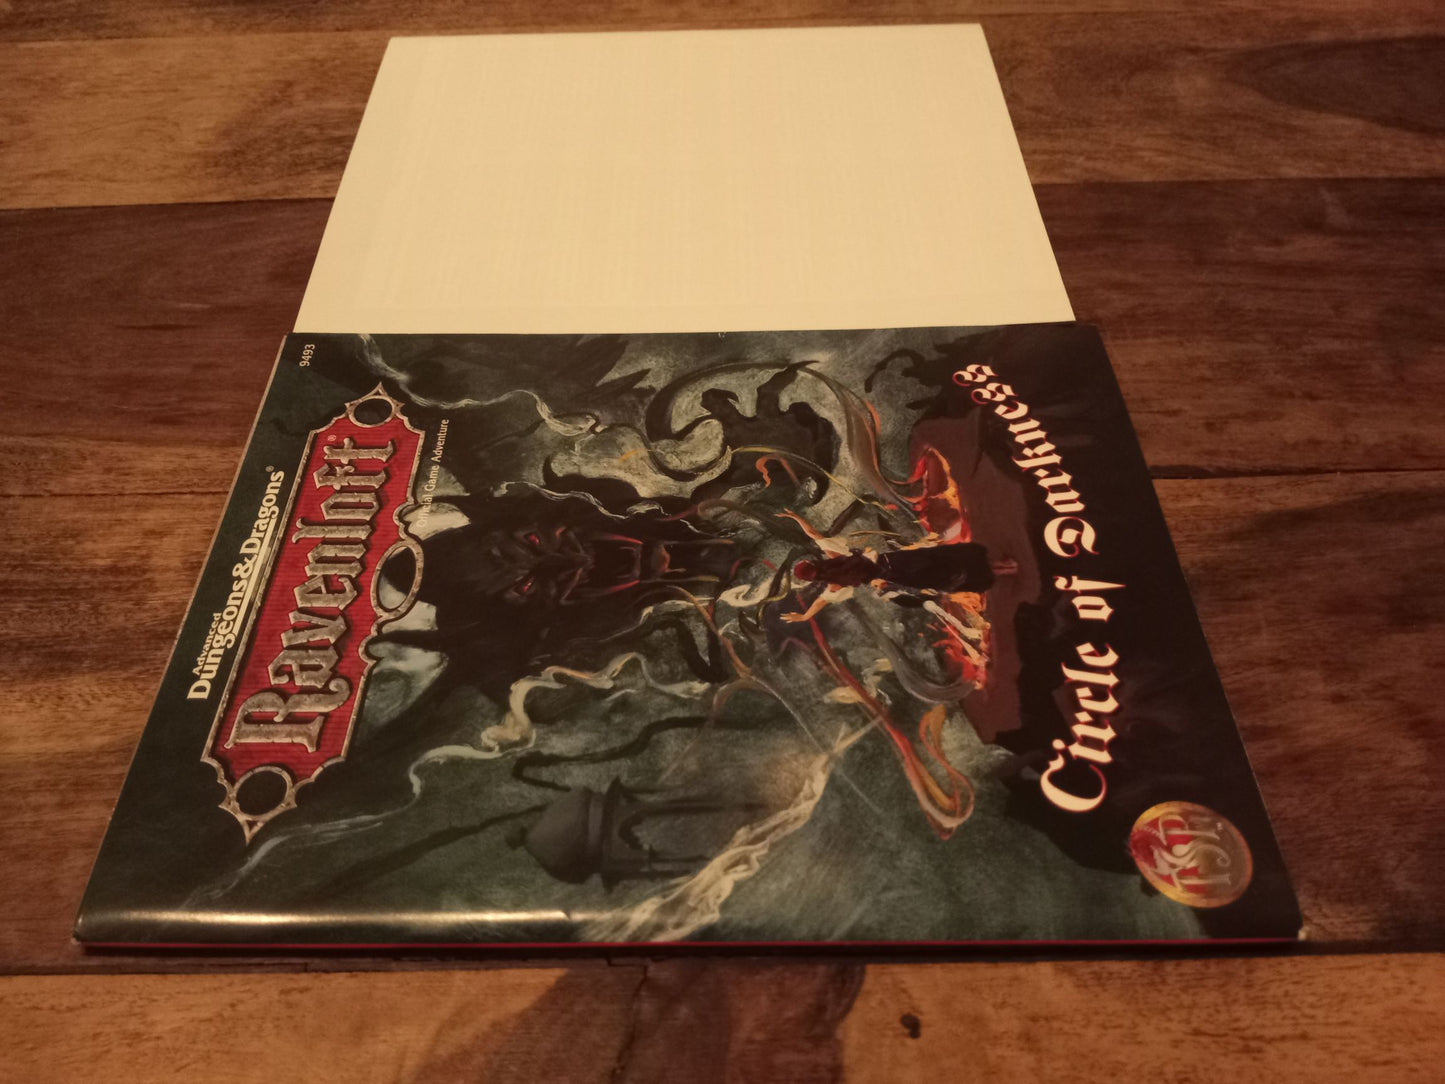 Ravenloft Circle of Darkness With Map AD&D 2nd Edition 1995 TSR 9493